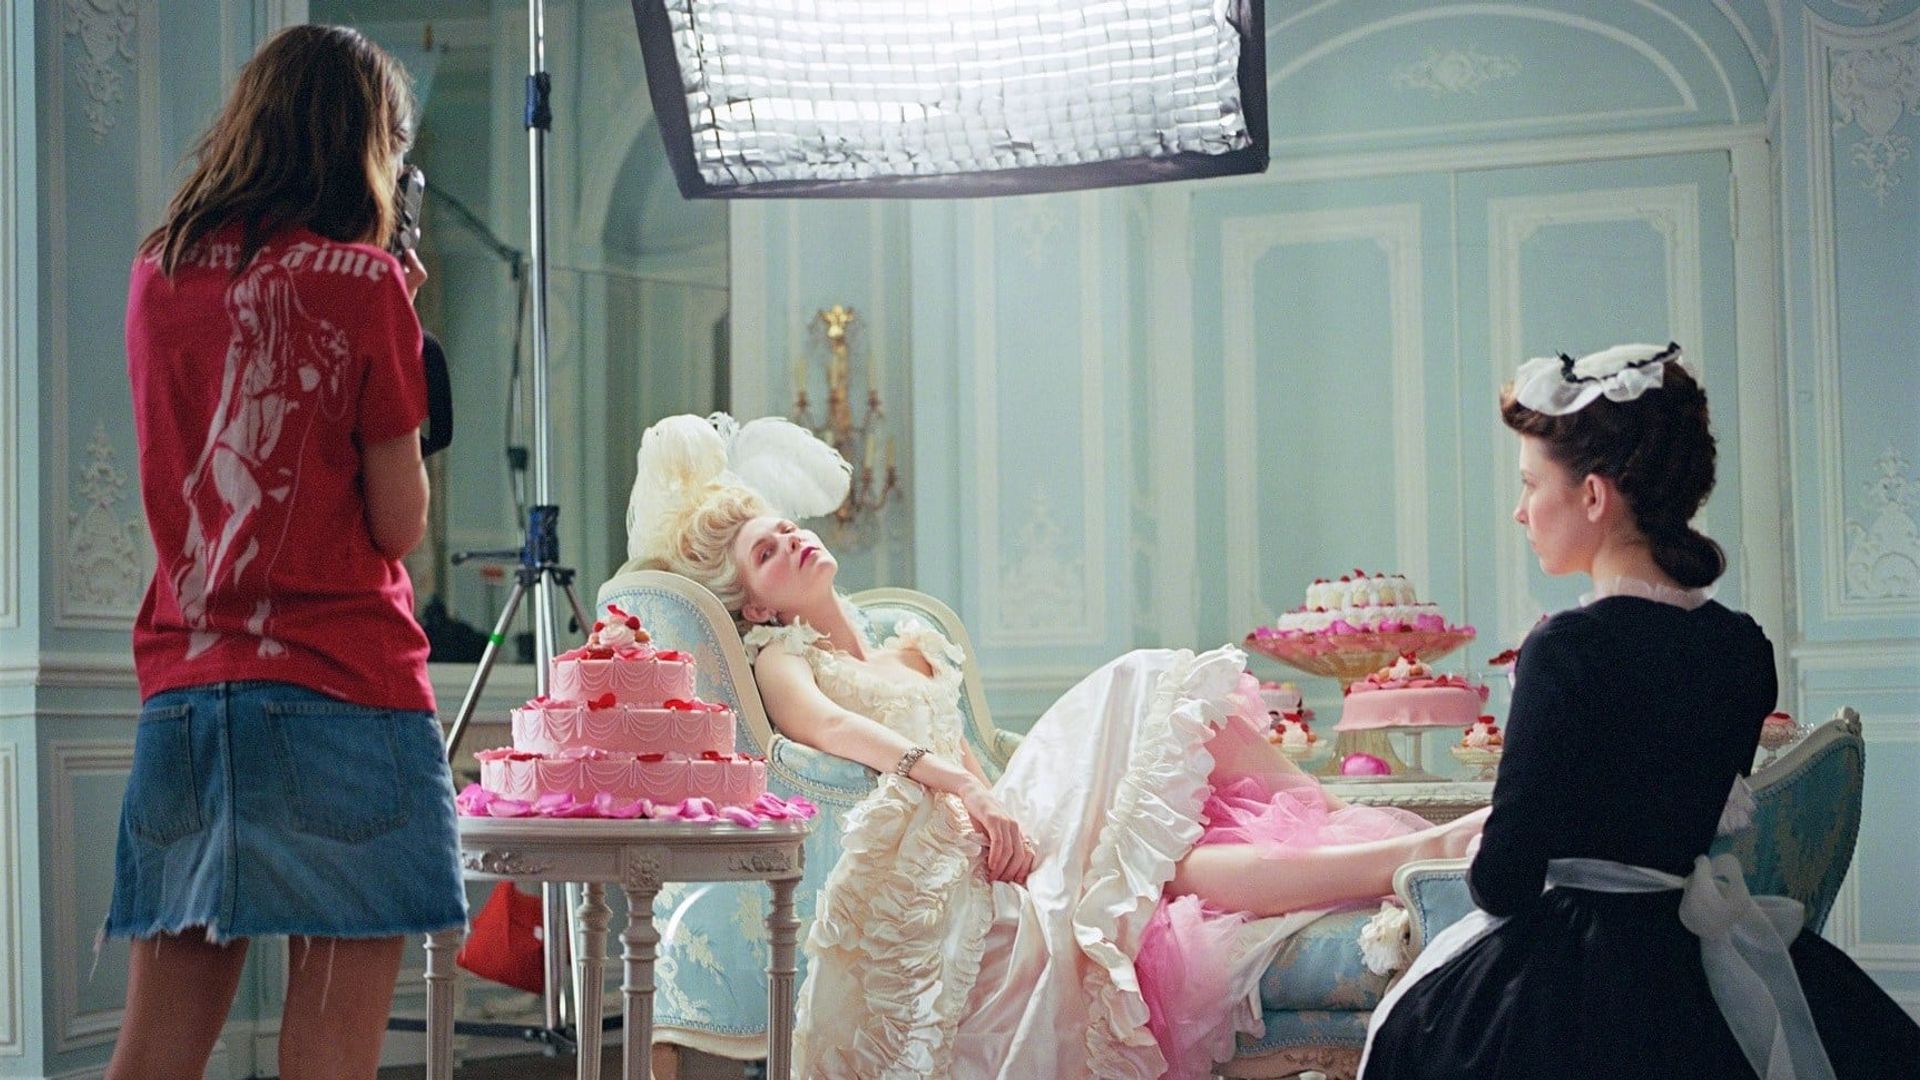 The Making of 'Marie Antoinette' background